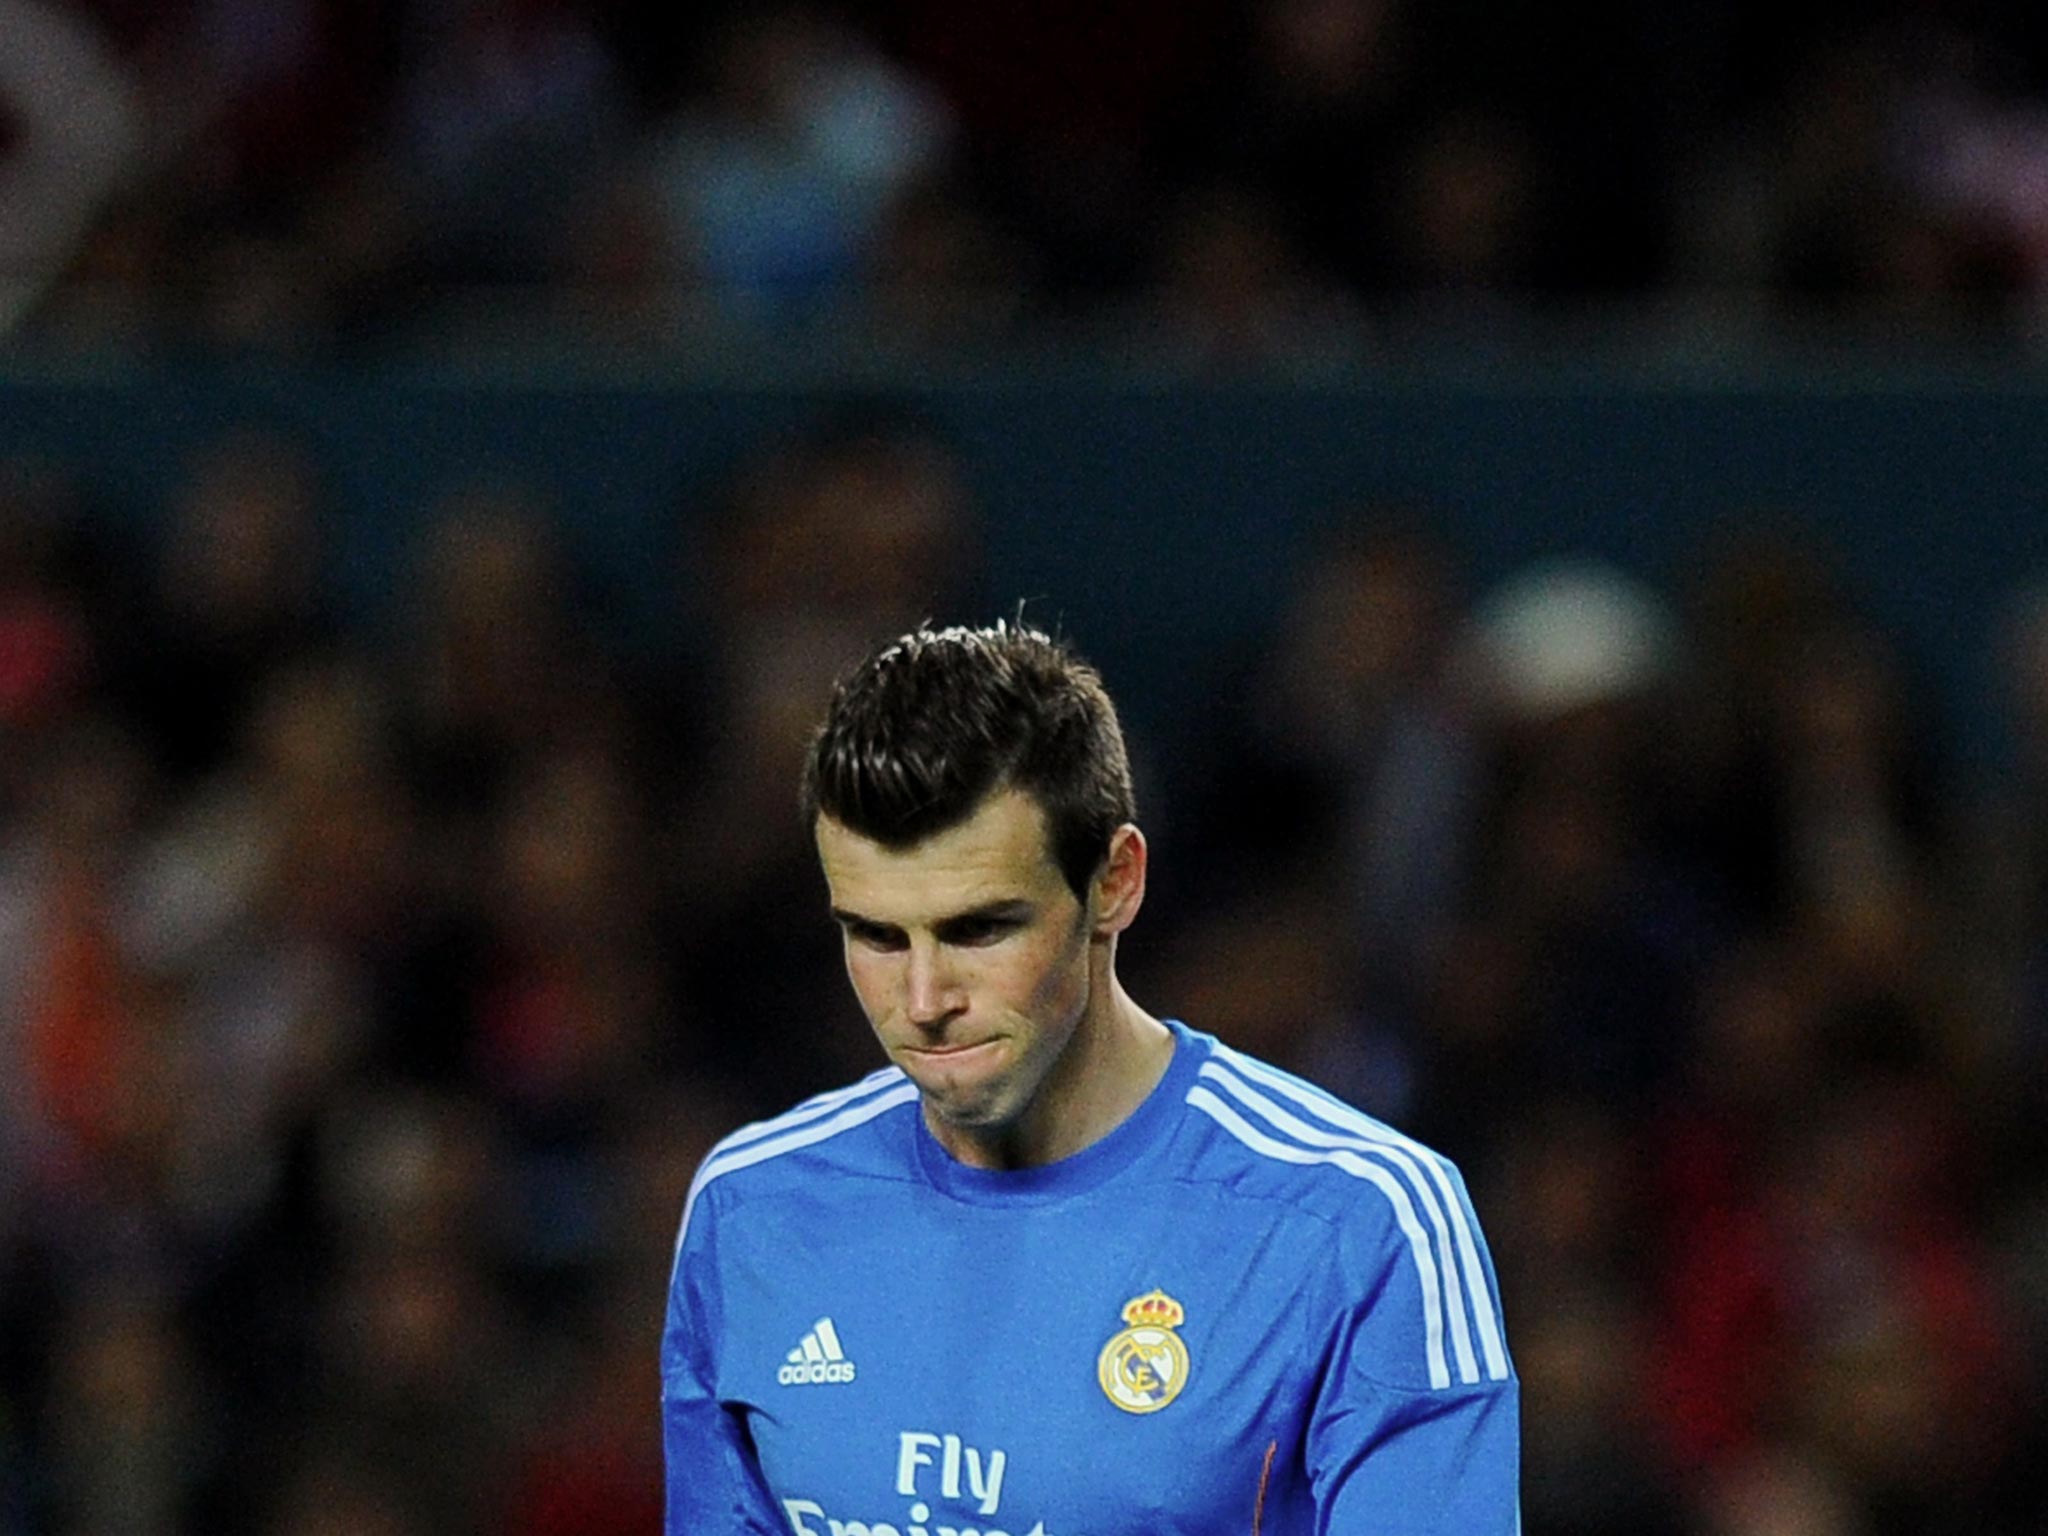 Gareth Bale's first appearance in an El Clasico also kicked off at 5pm on a Saturday